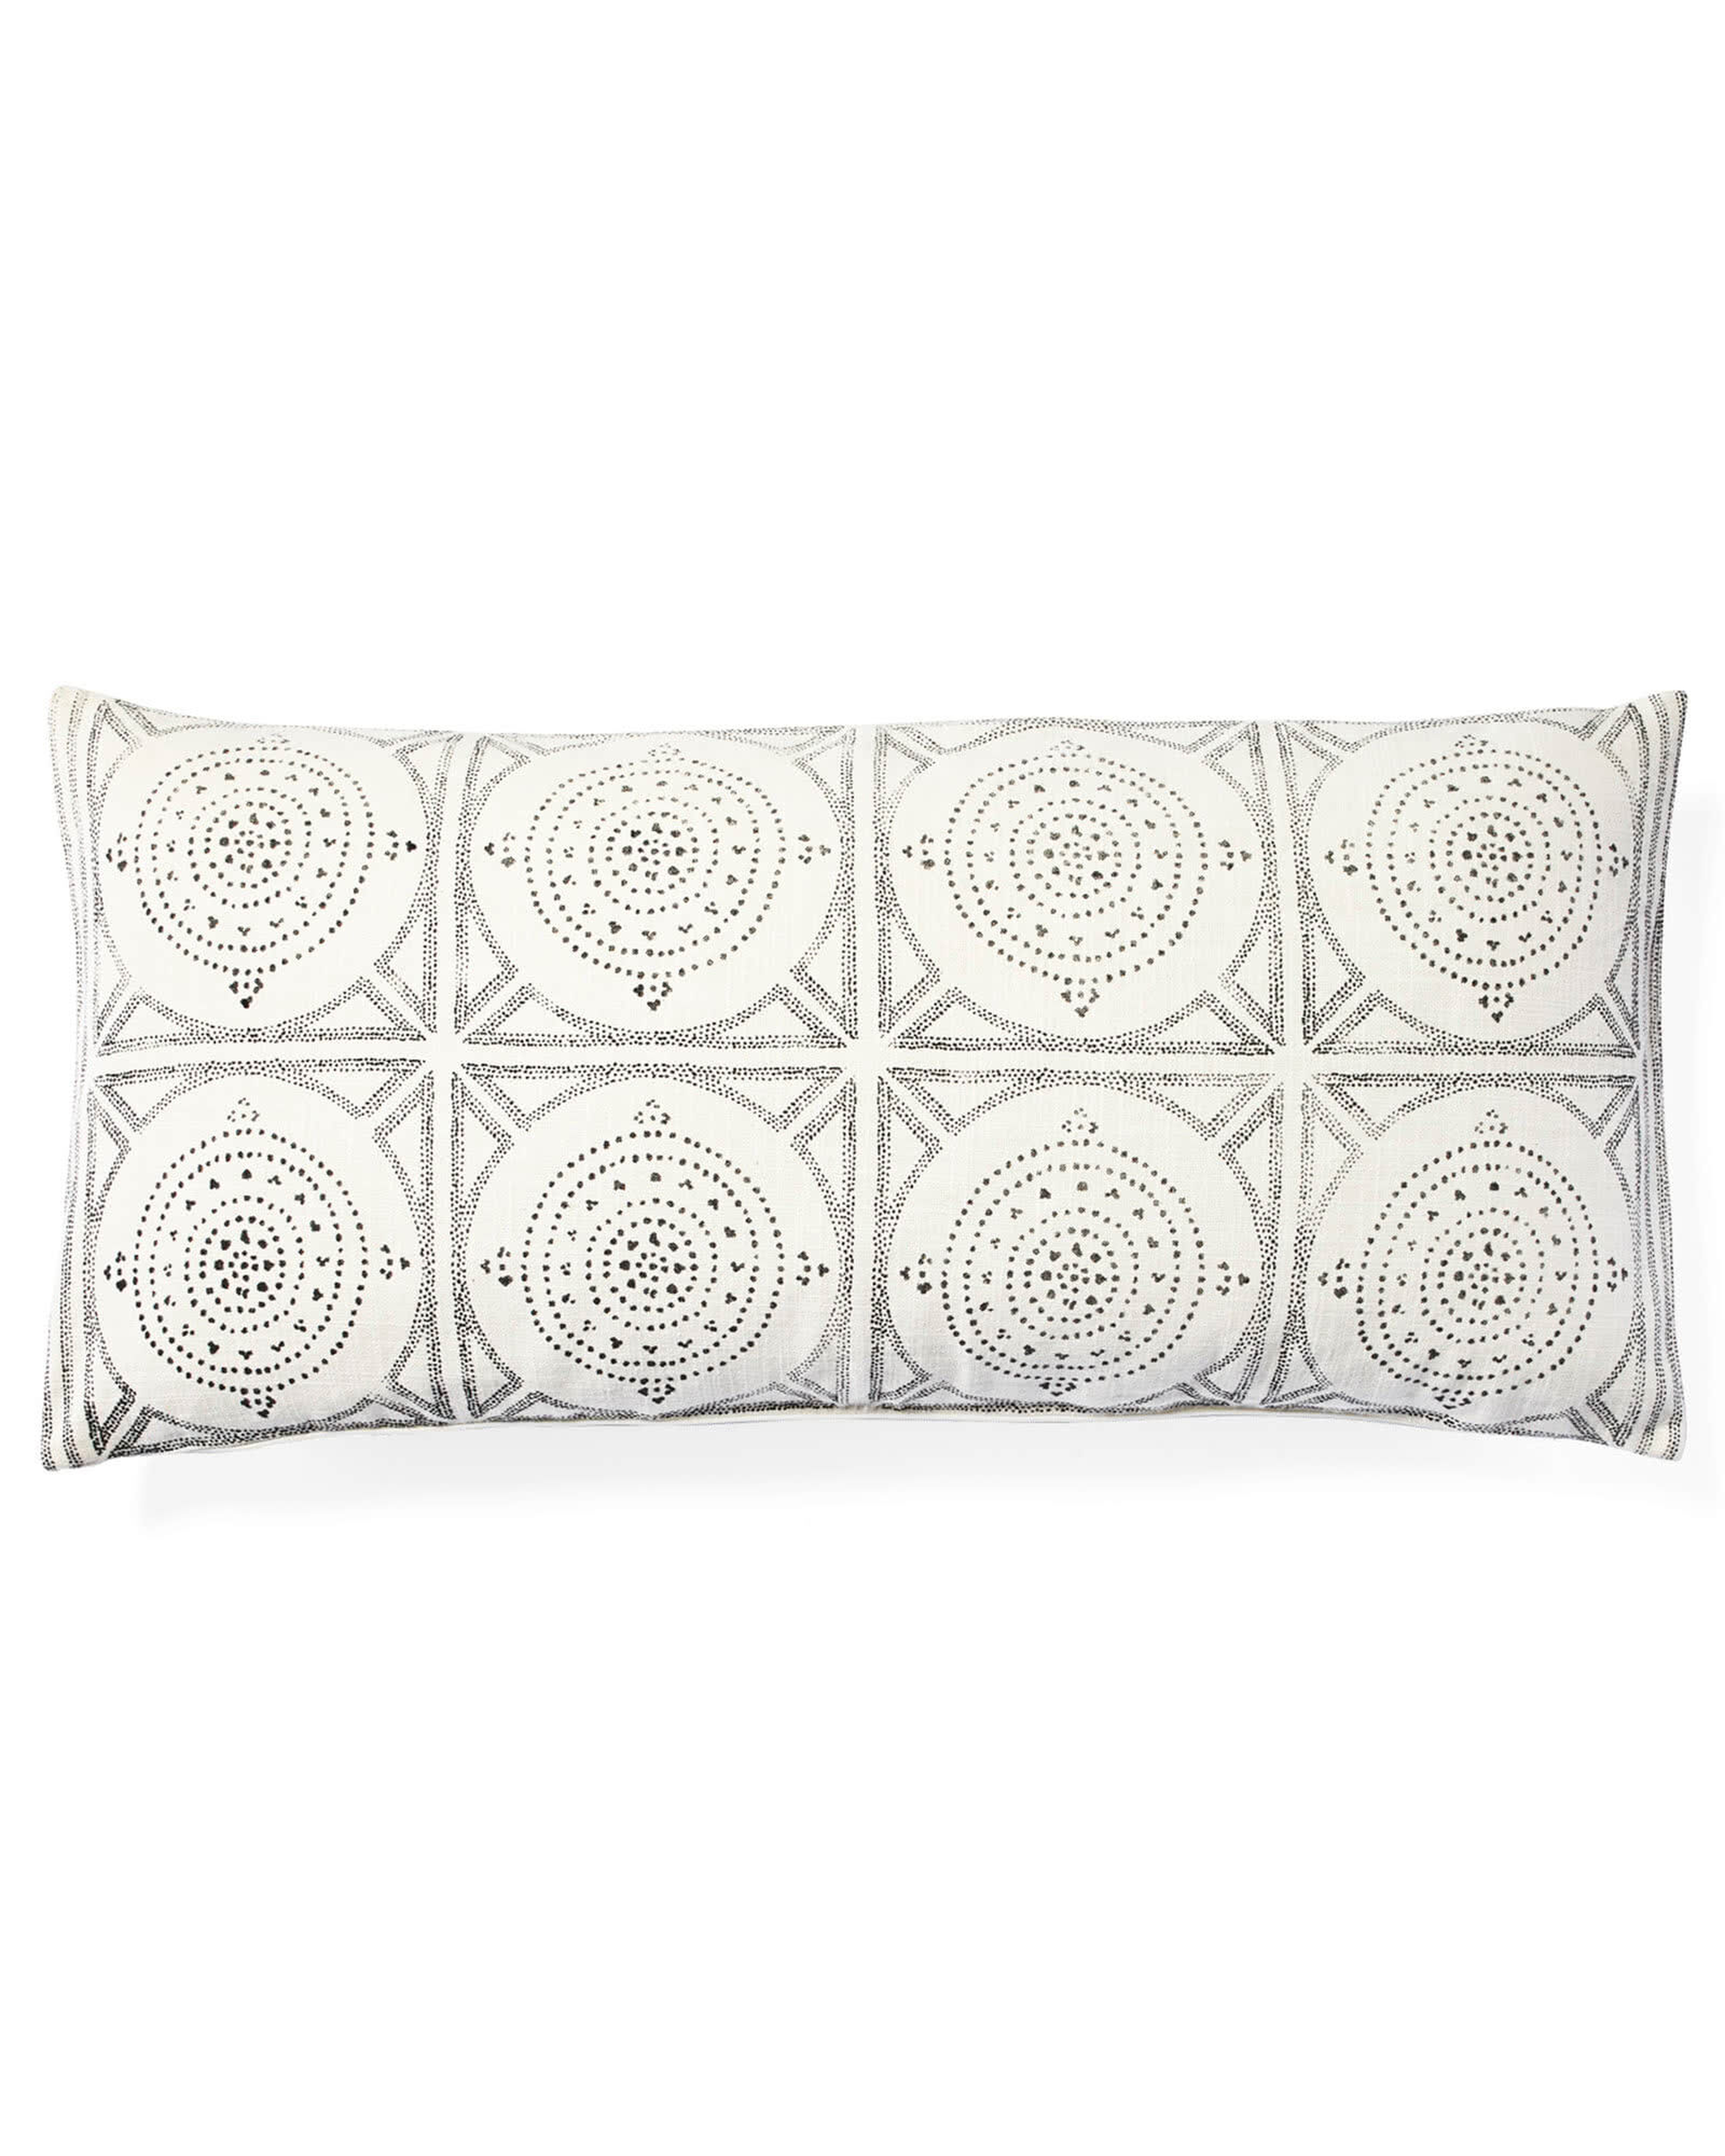 Camille Mosaic Lumbar Pillow Cover - Serena and Lily